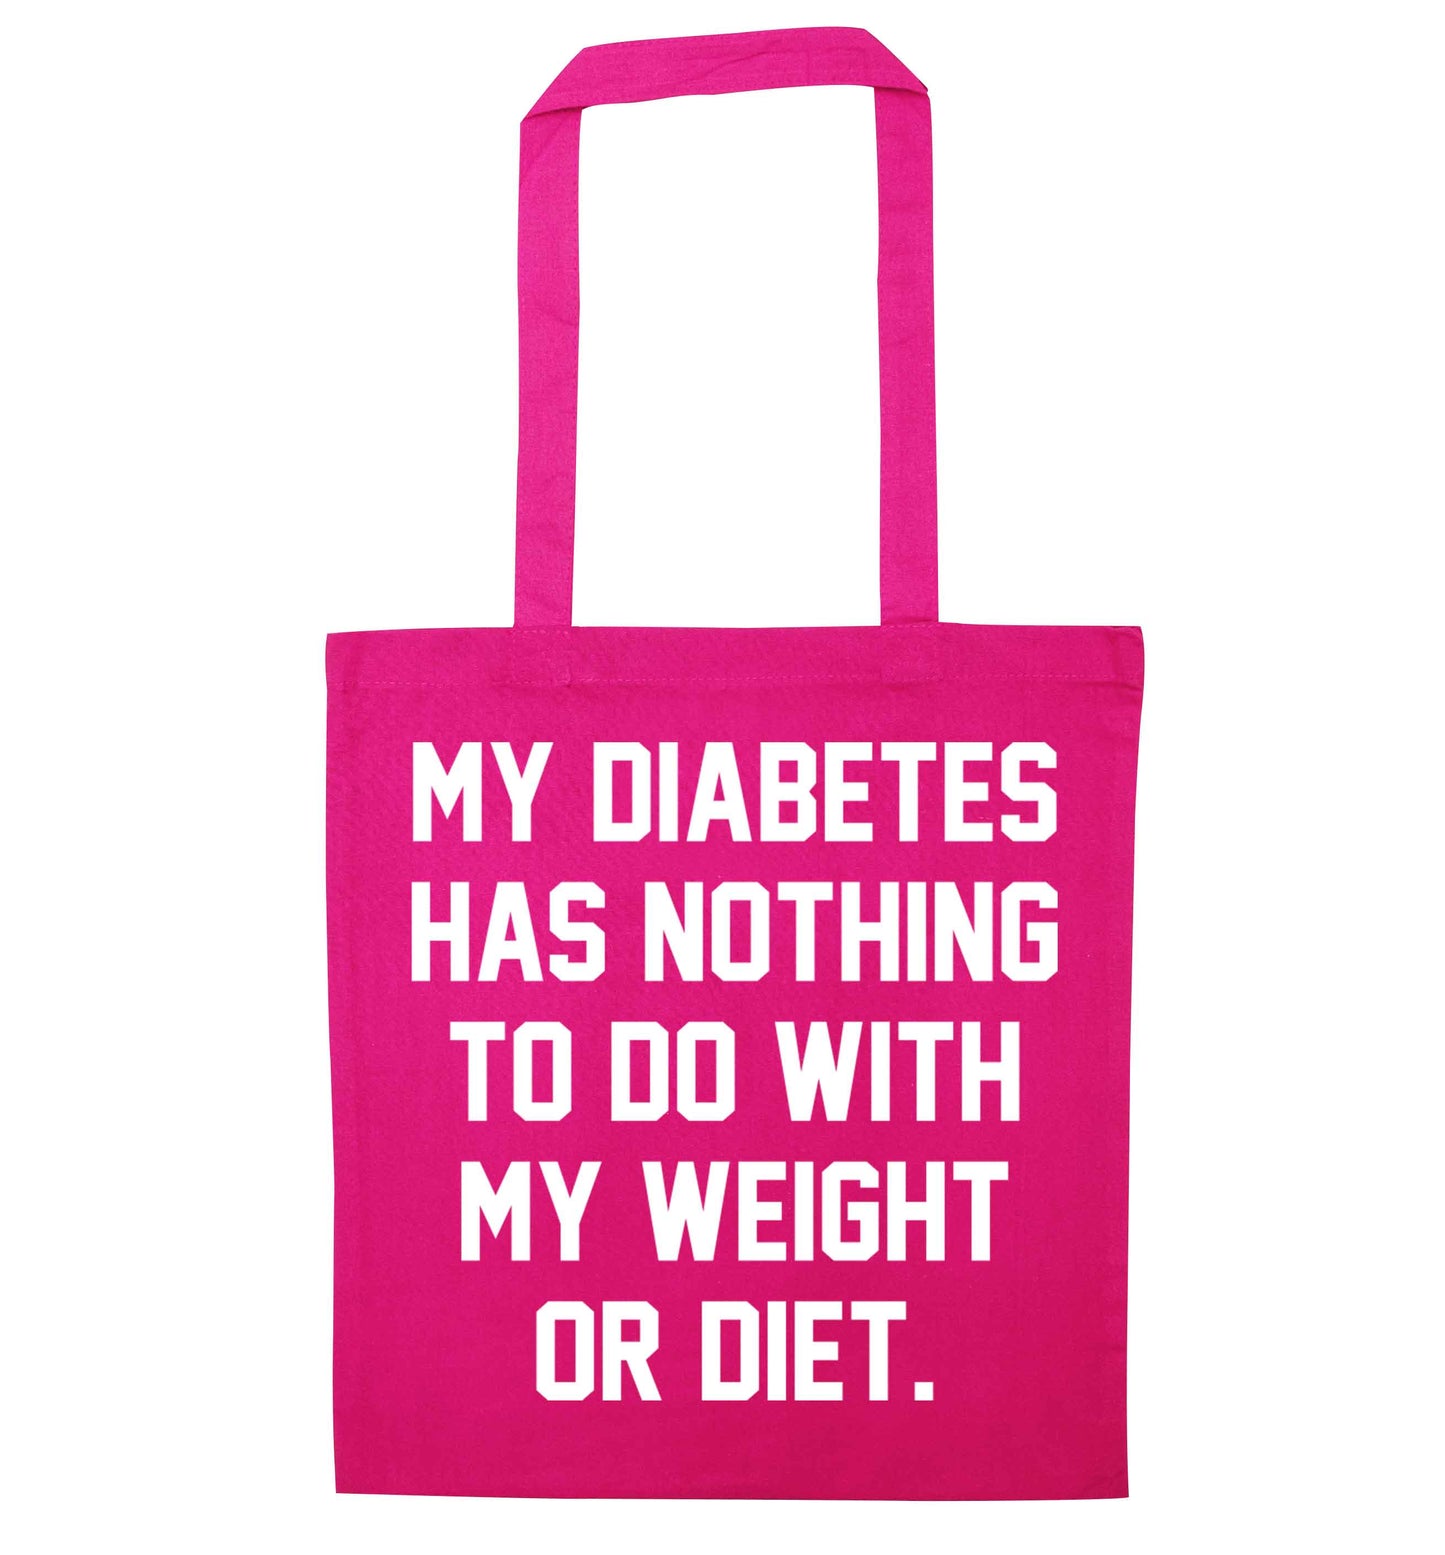 My diabetes has nothing to do with my weight or diet pink tote bag